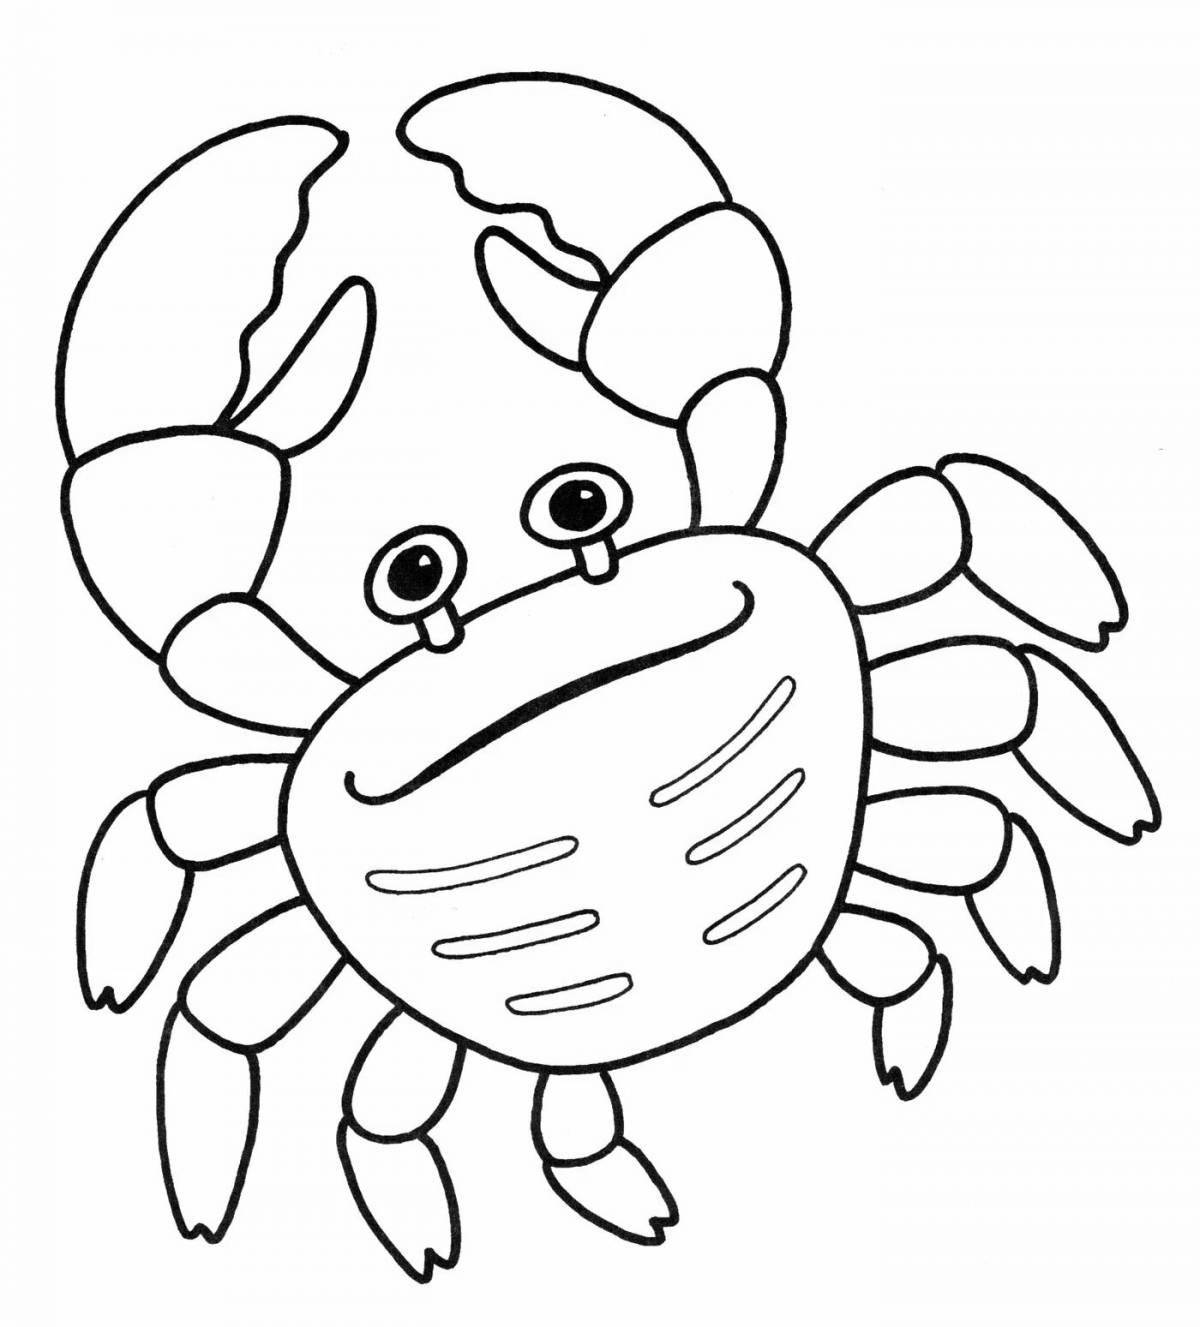 Sweet crab coloring page